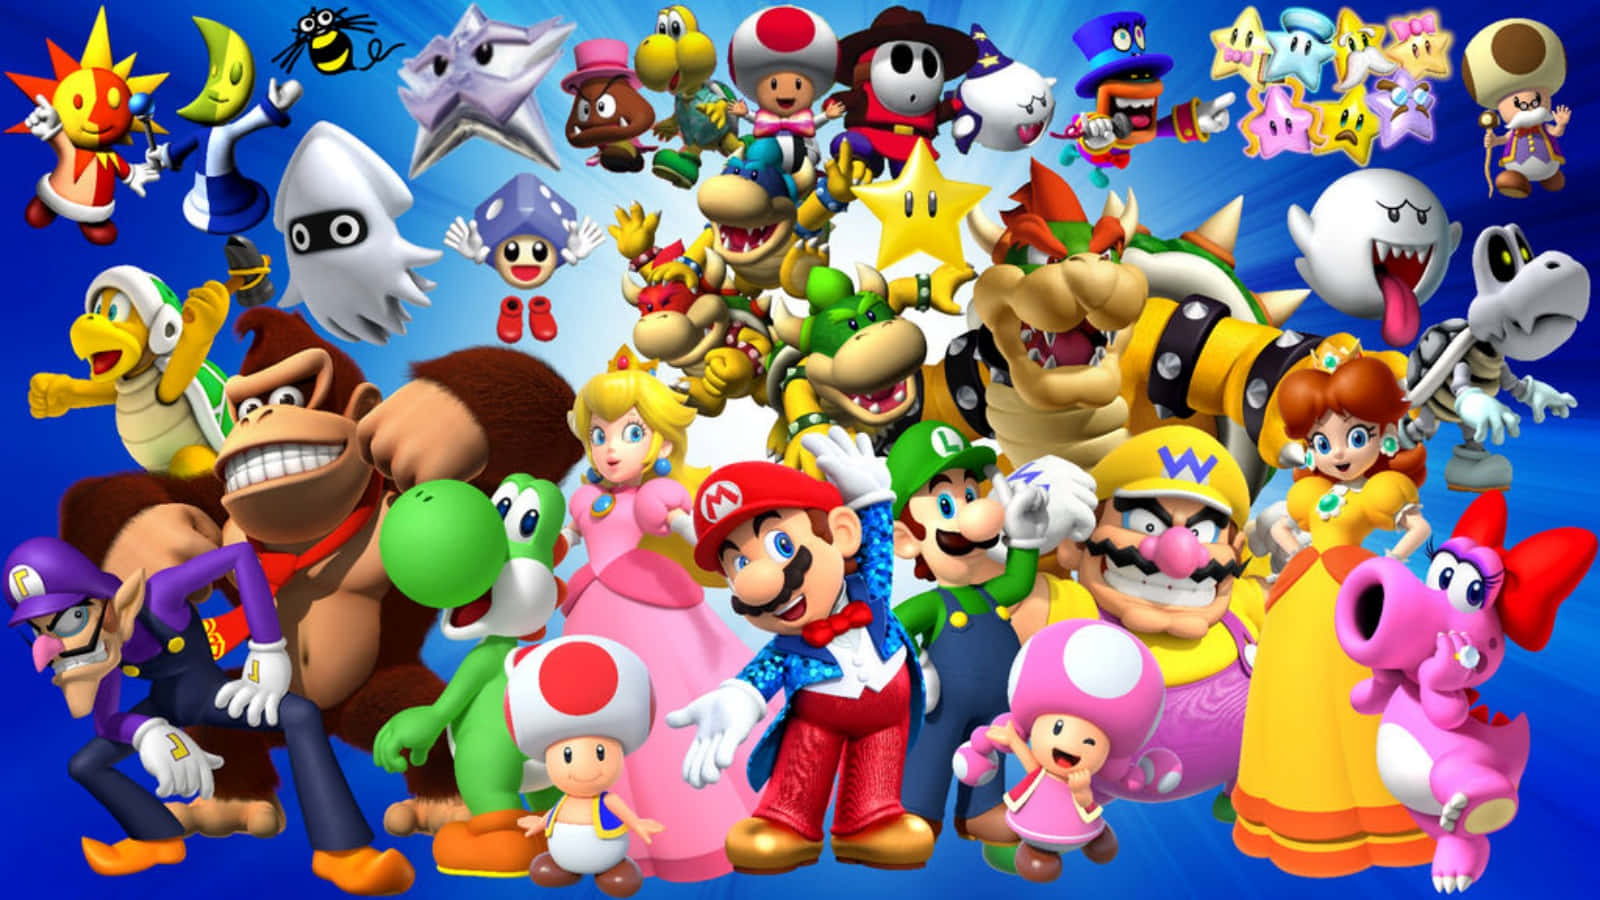 Exciting World of Super Mario Characters Wallpaper